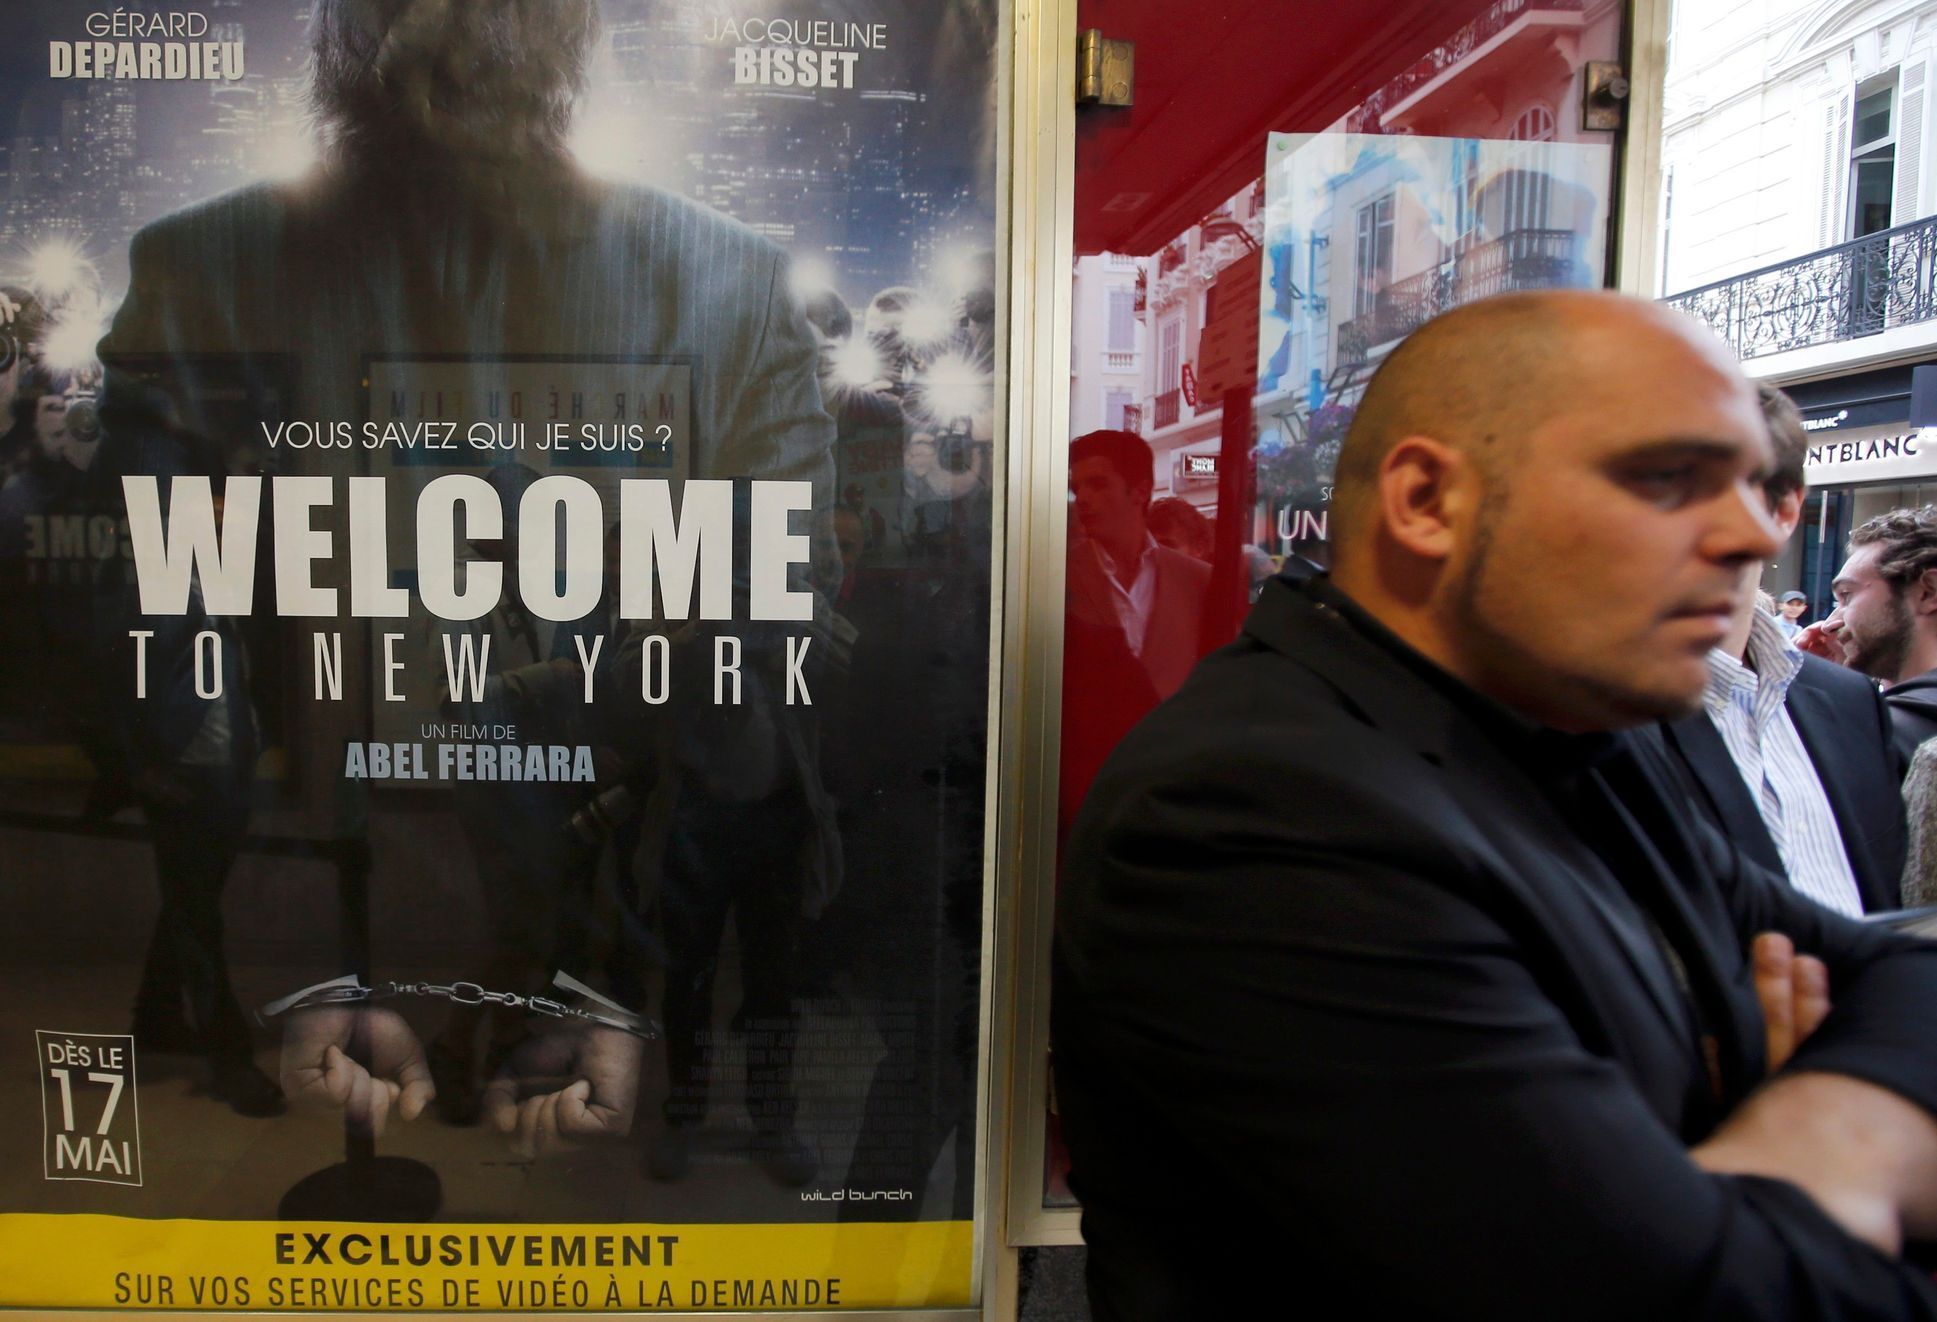 A man stands next to a poster of the film &quot;Welcome to New York&quot; directed by Abel Ferrara at a movie theatre ahead of a premiere screening during the 67th Cannes Film Festival in Cannes